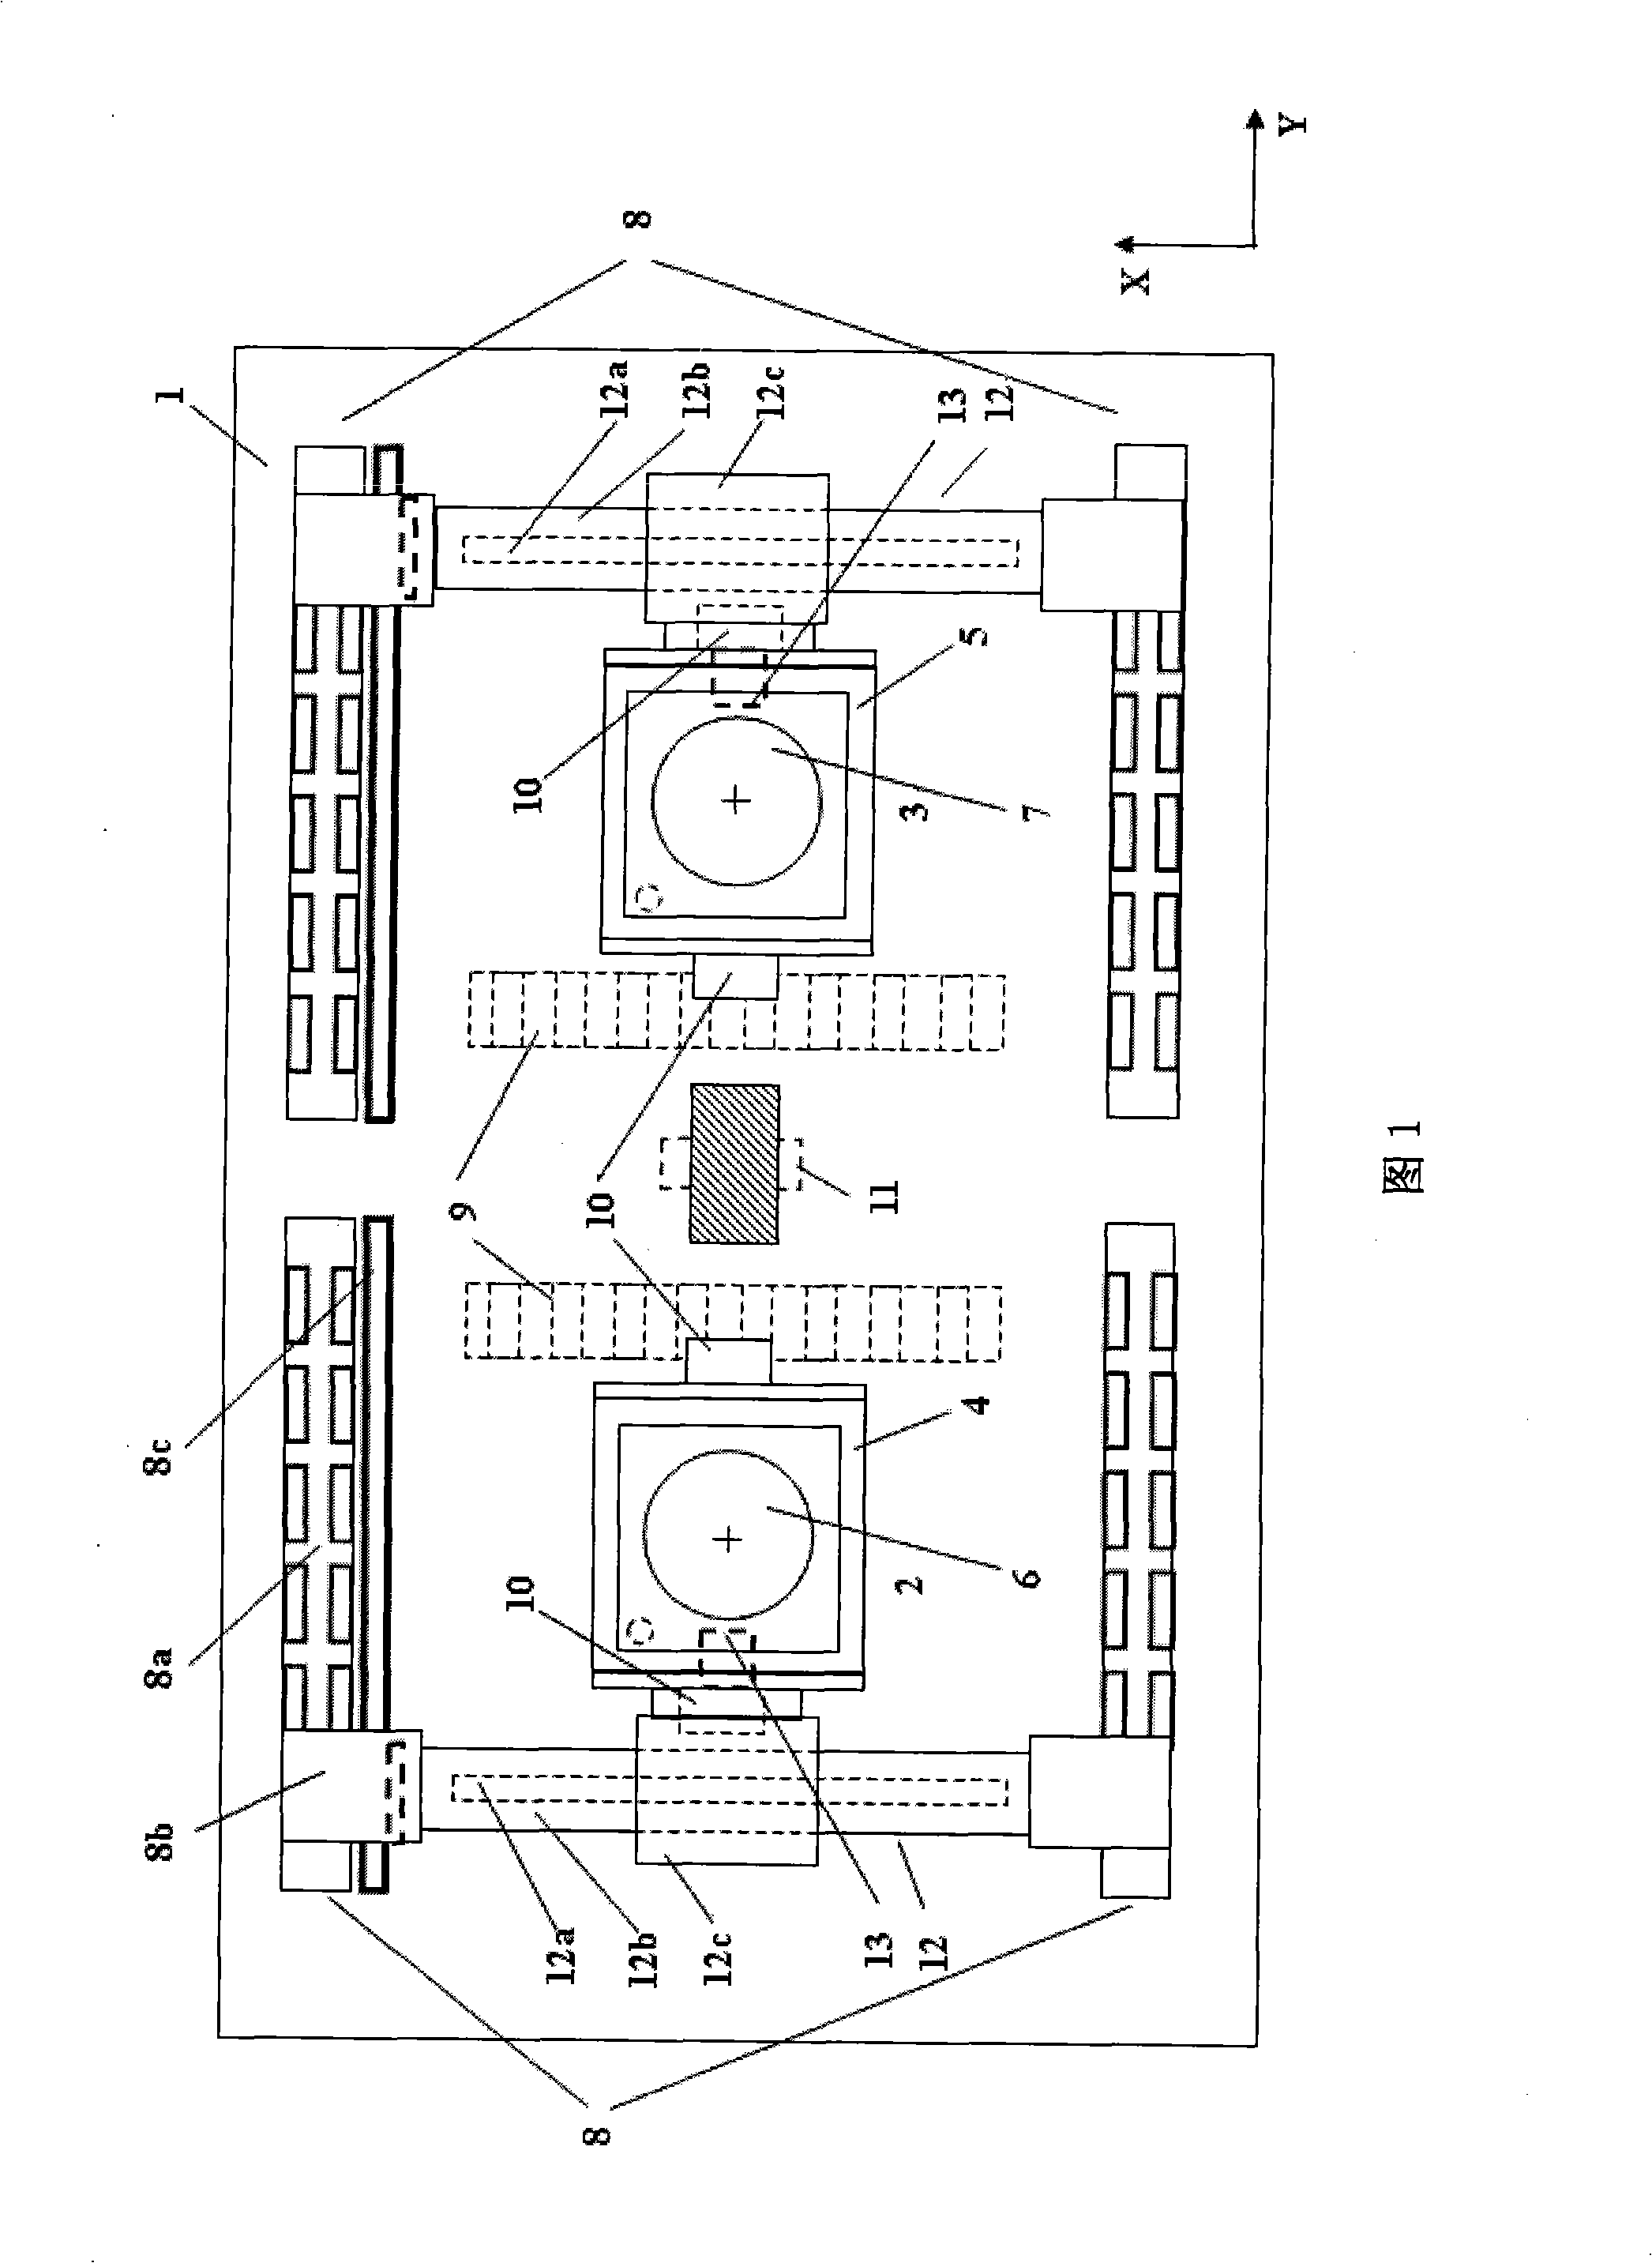 Embedded type common basal plane two-dimension balance double-drive double-workpiece platform positioning system